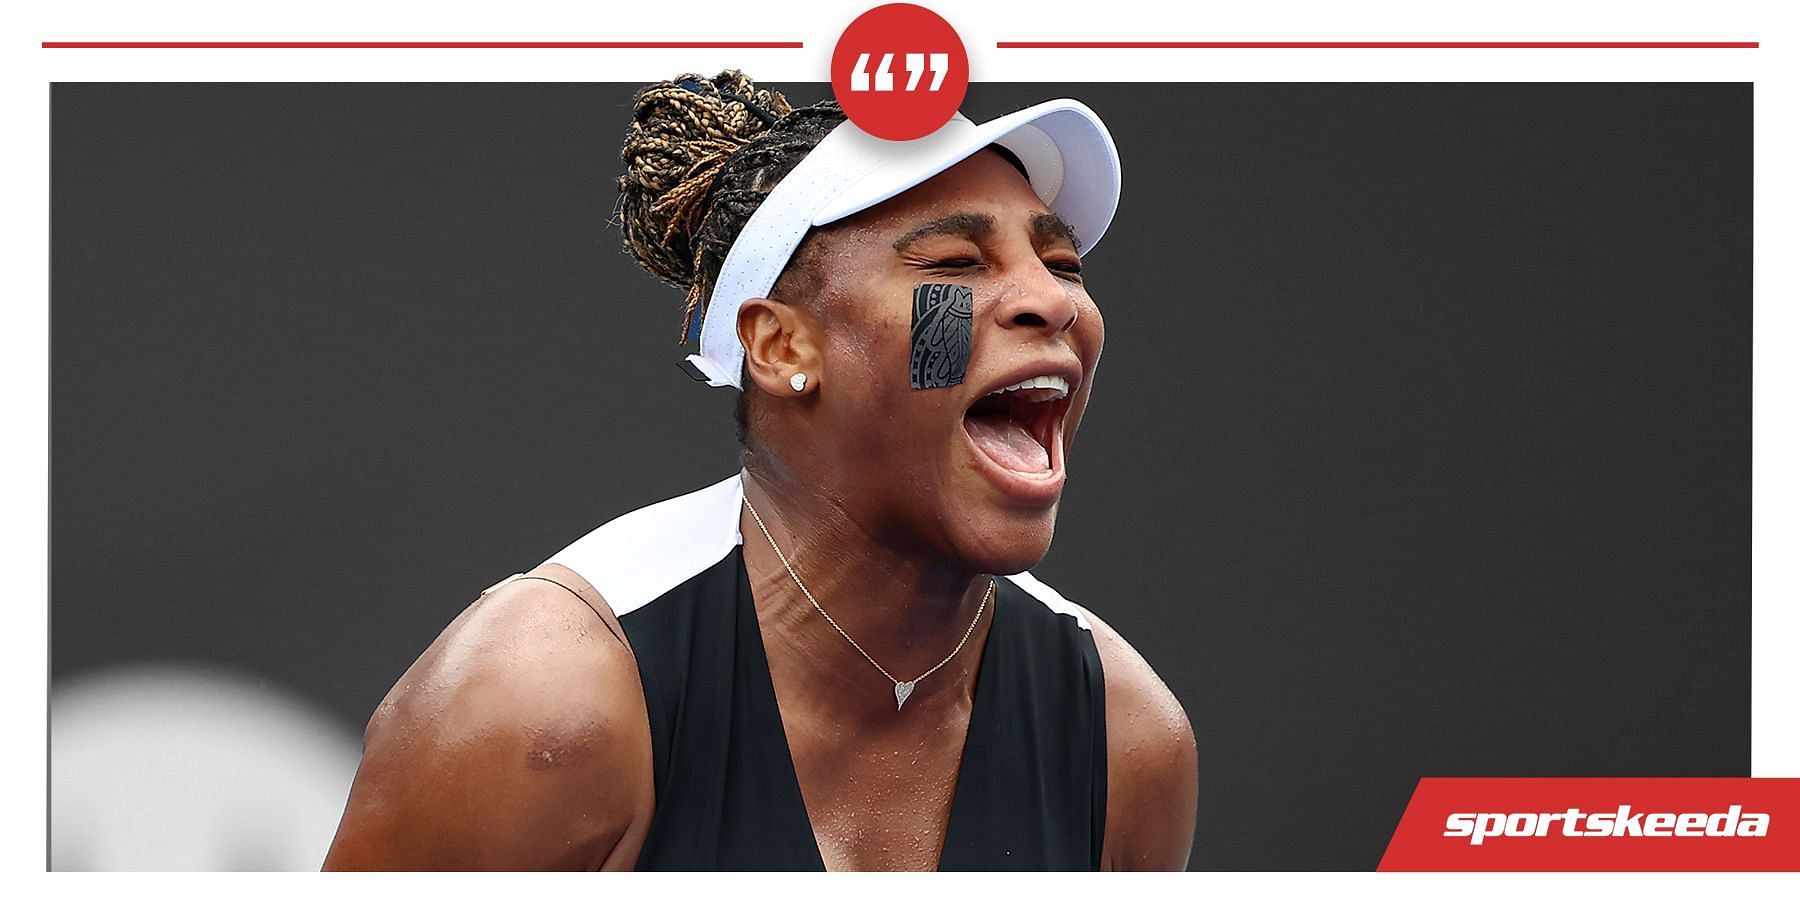 Serena Williams said that Toronto is one of her favorite stops on the tour